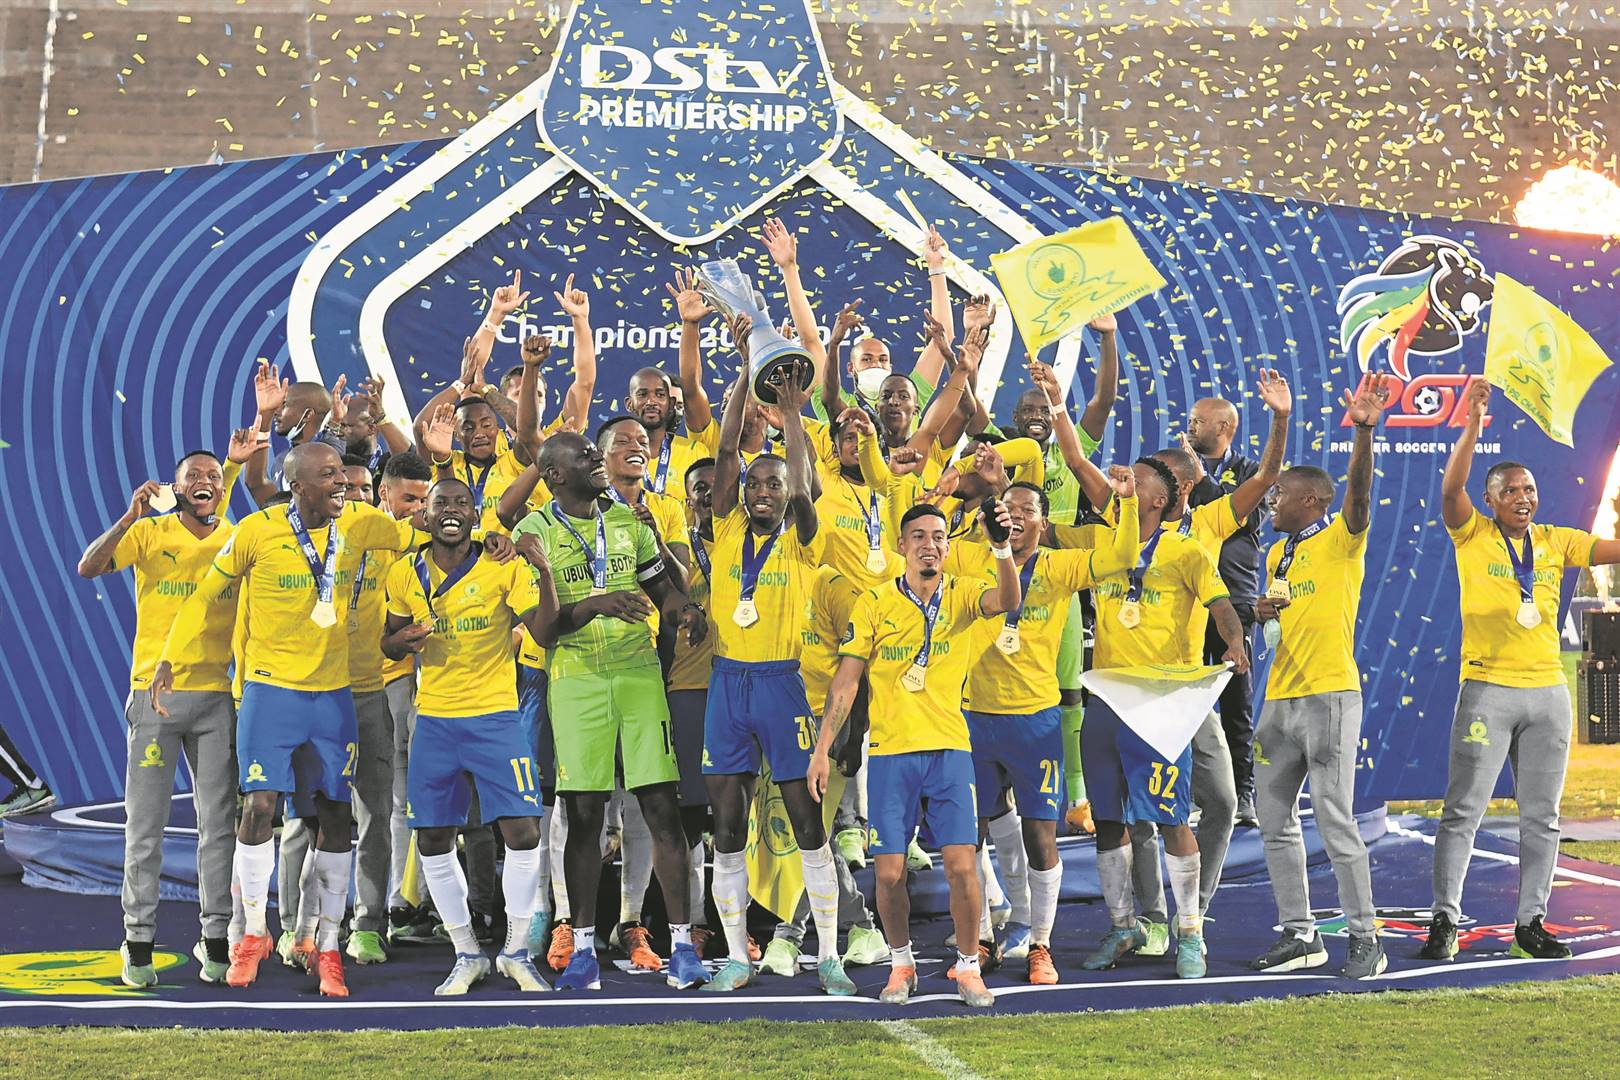 Mamelodi Sundowns are the reigning PSL champions in South Africa.